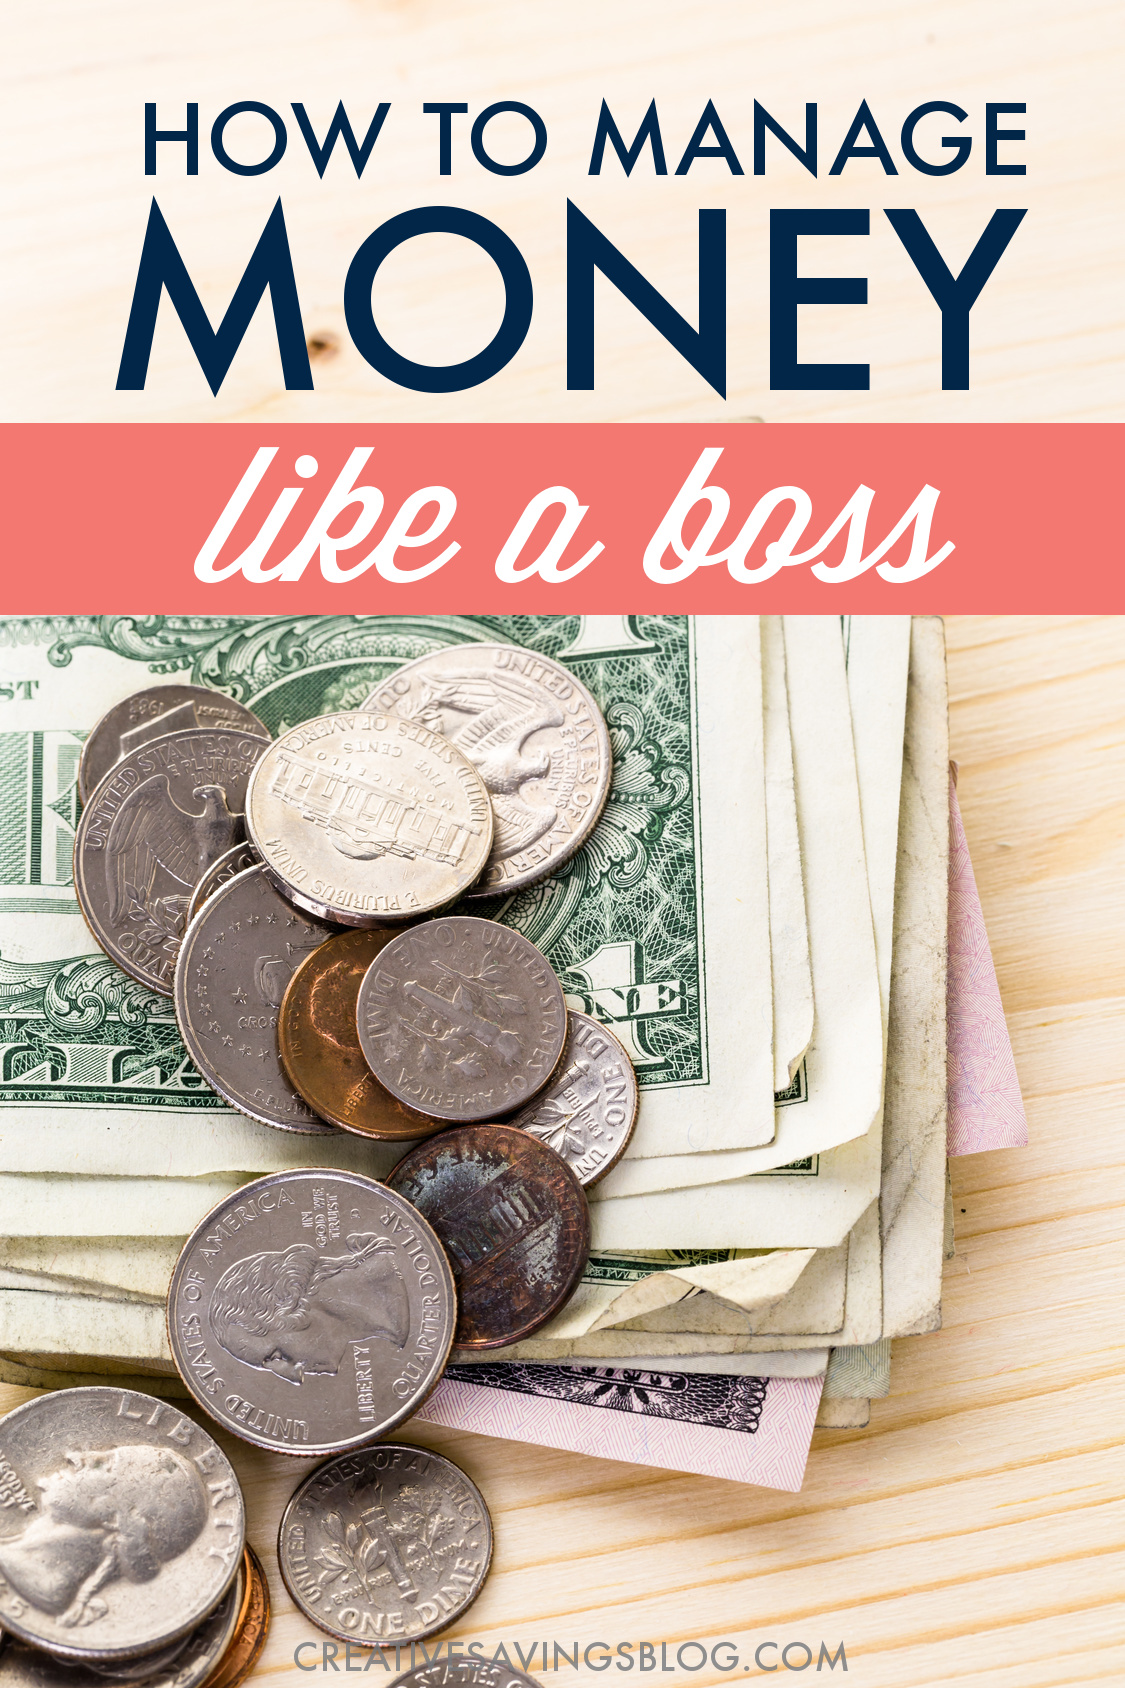 This page has SO many resources to spend and save smarter!! I bookmarked it immediately and have been working my way through all the posts. Each day I try something new and as a result, I'm doing better financially than I ever have before. She covers everything from budgeting tips to credit cards, and even offers a FREE money saving course! #moneymanagement #moneysavingtips #savingmoney #budgeting